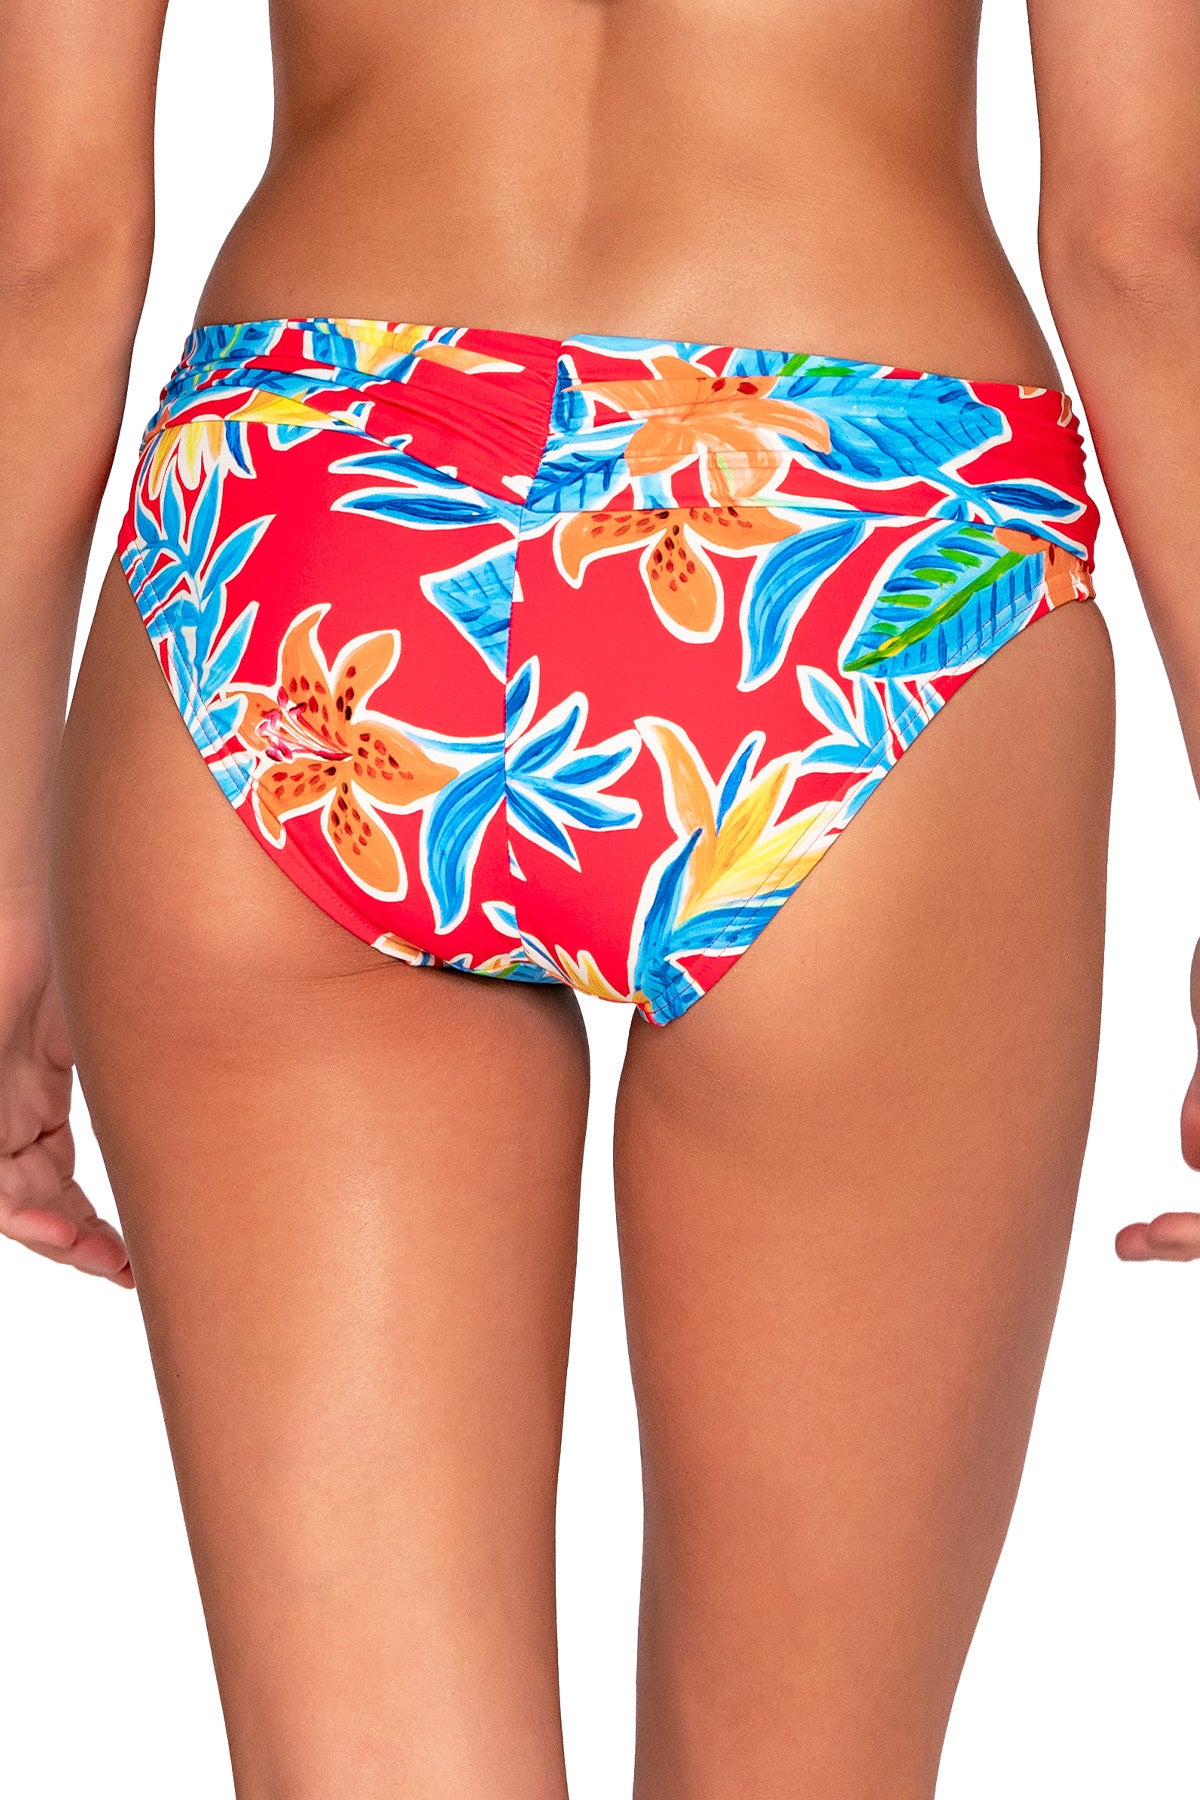 Back view of Sunsets Tiger Lily Unforgettable Bottom